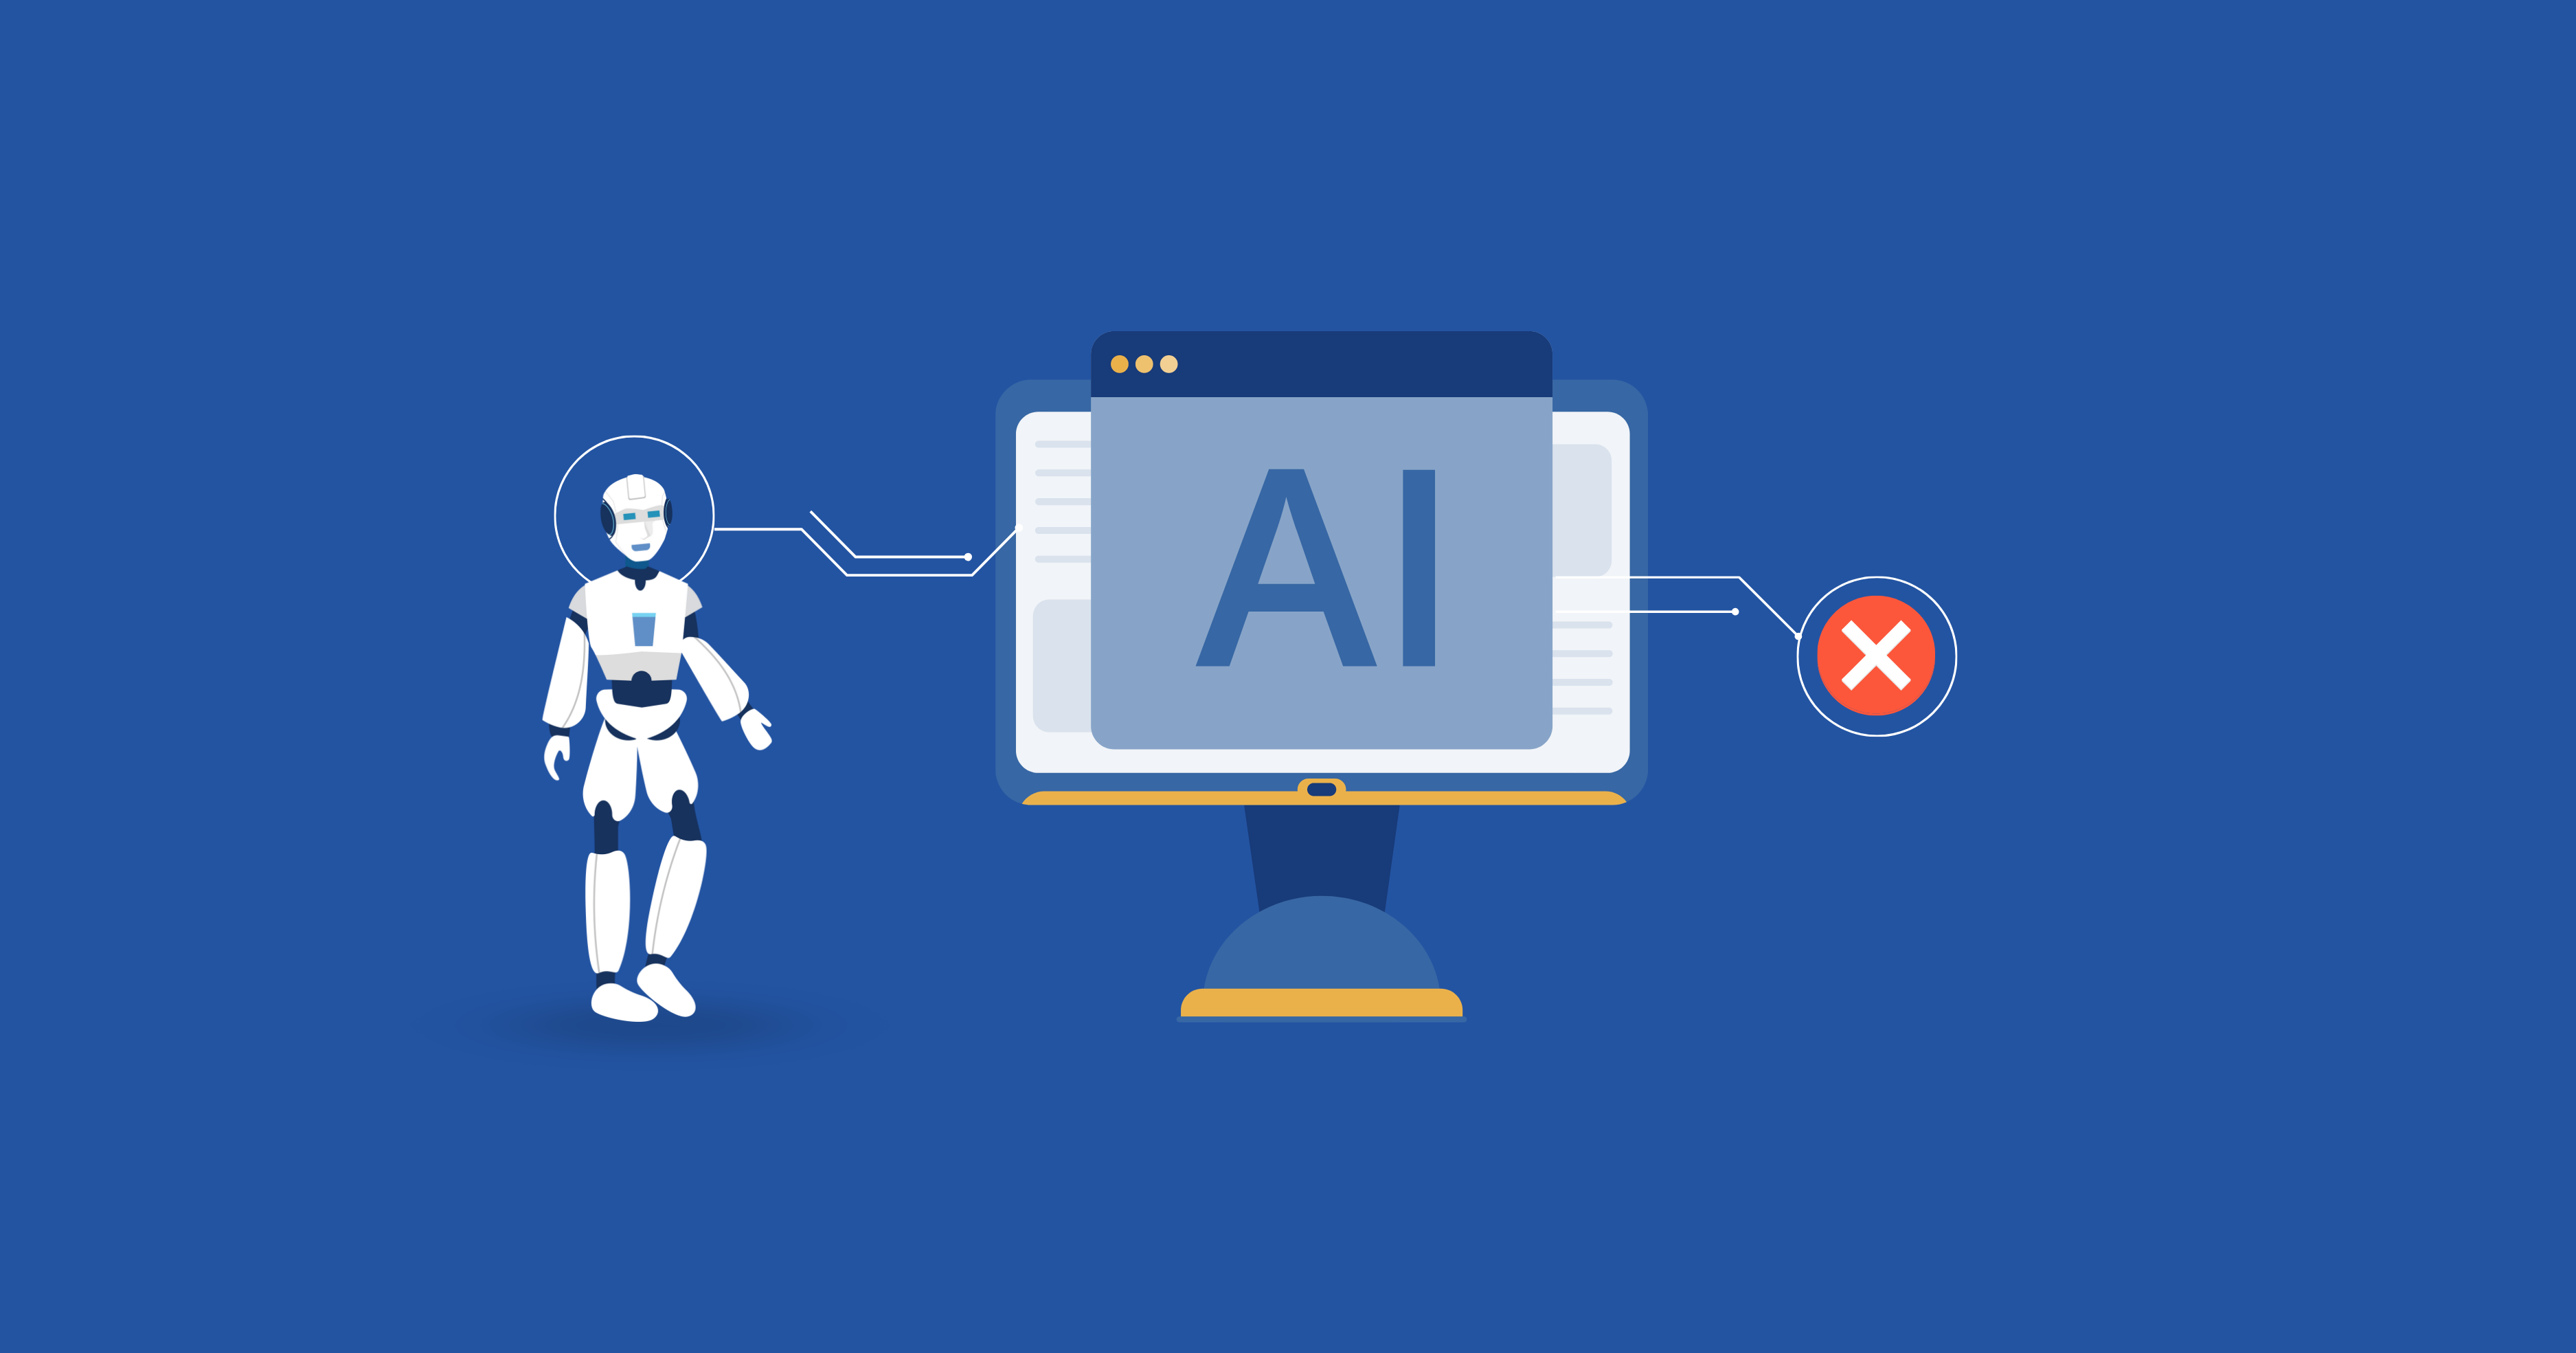 Your Blog Shouldn't Be Written by AI